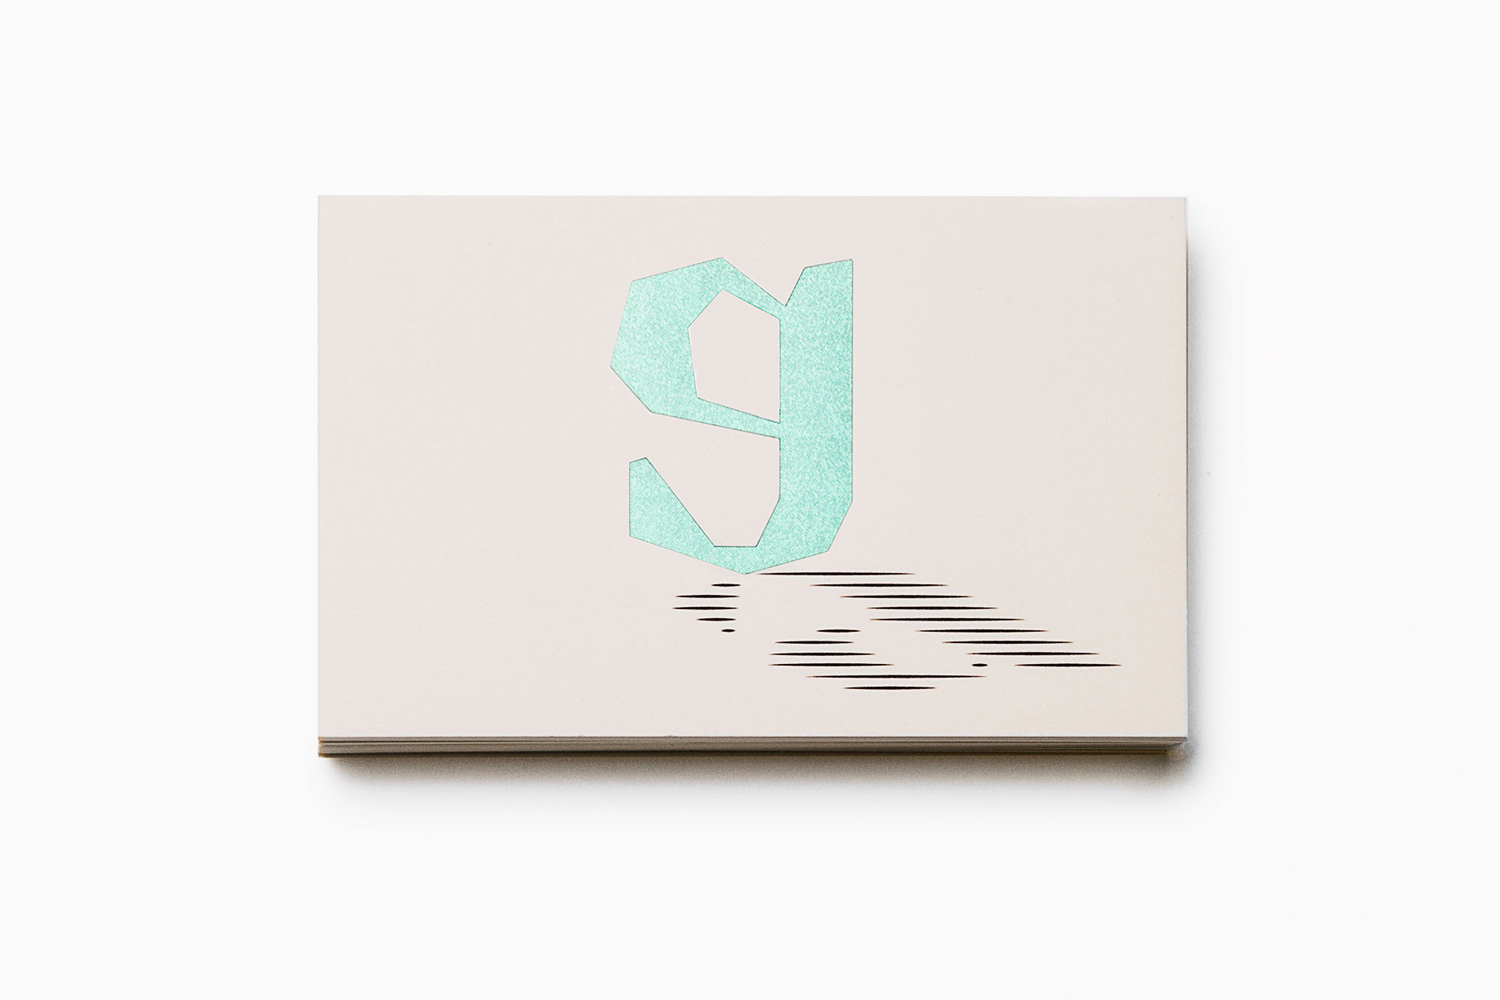 Brand identity and business card designed by Bedow for Swedish still life and food photographer Gustav Almestål